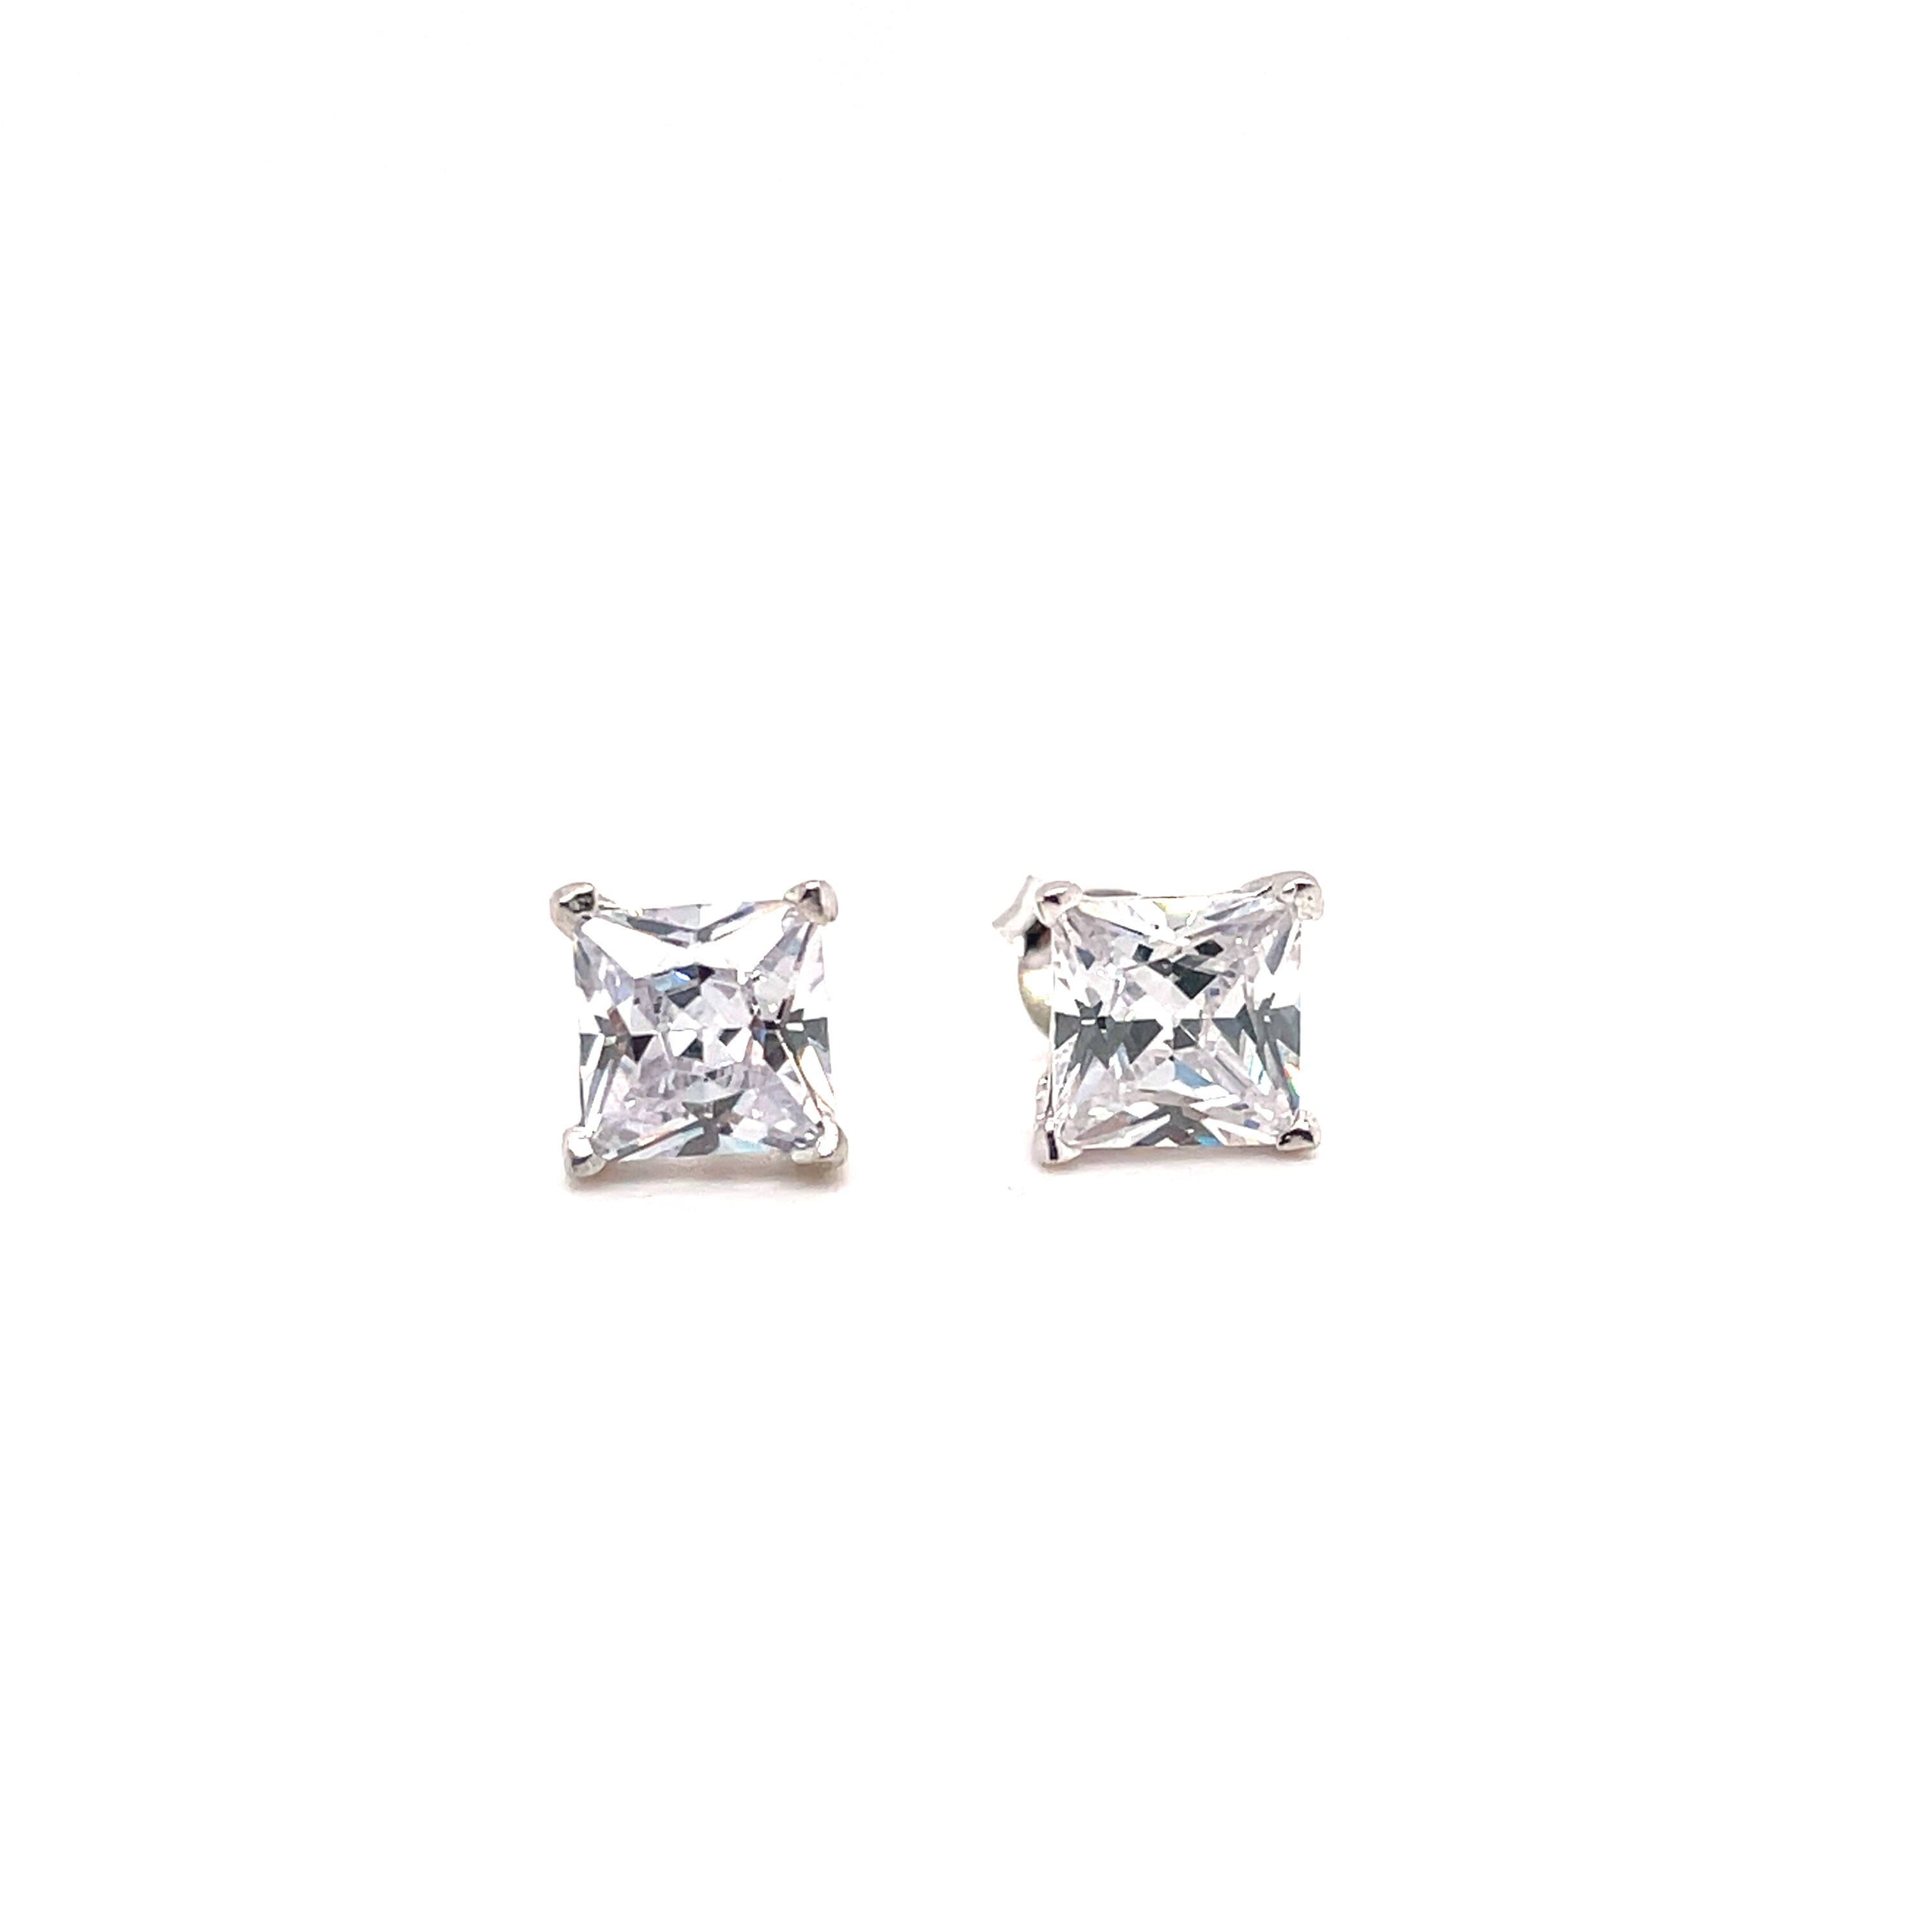 Sterling Silver Square CZ Stud Earrings - All Sizes - Hallmark Jewellers Formby & The Jewellers Bench Widnes